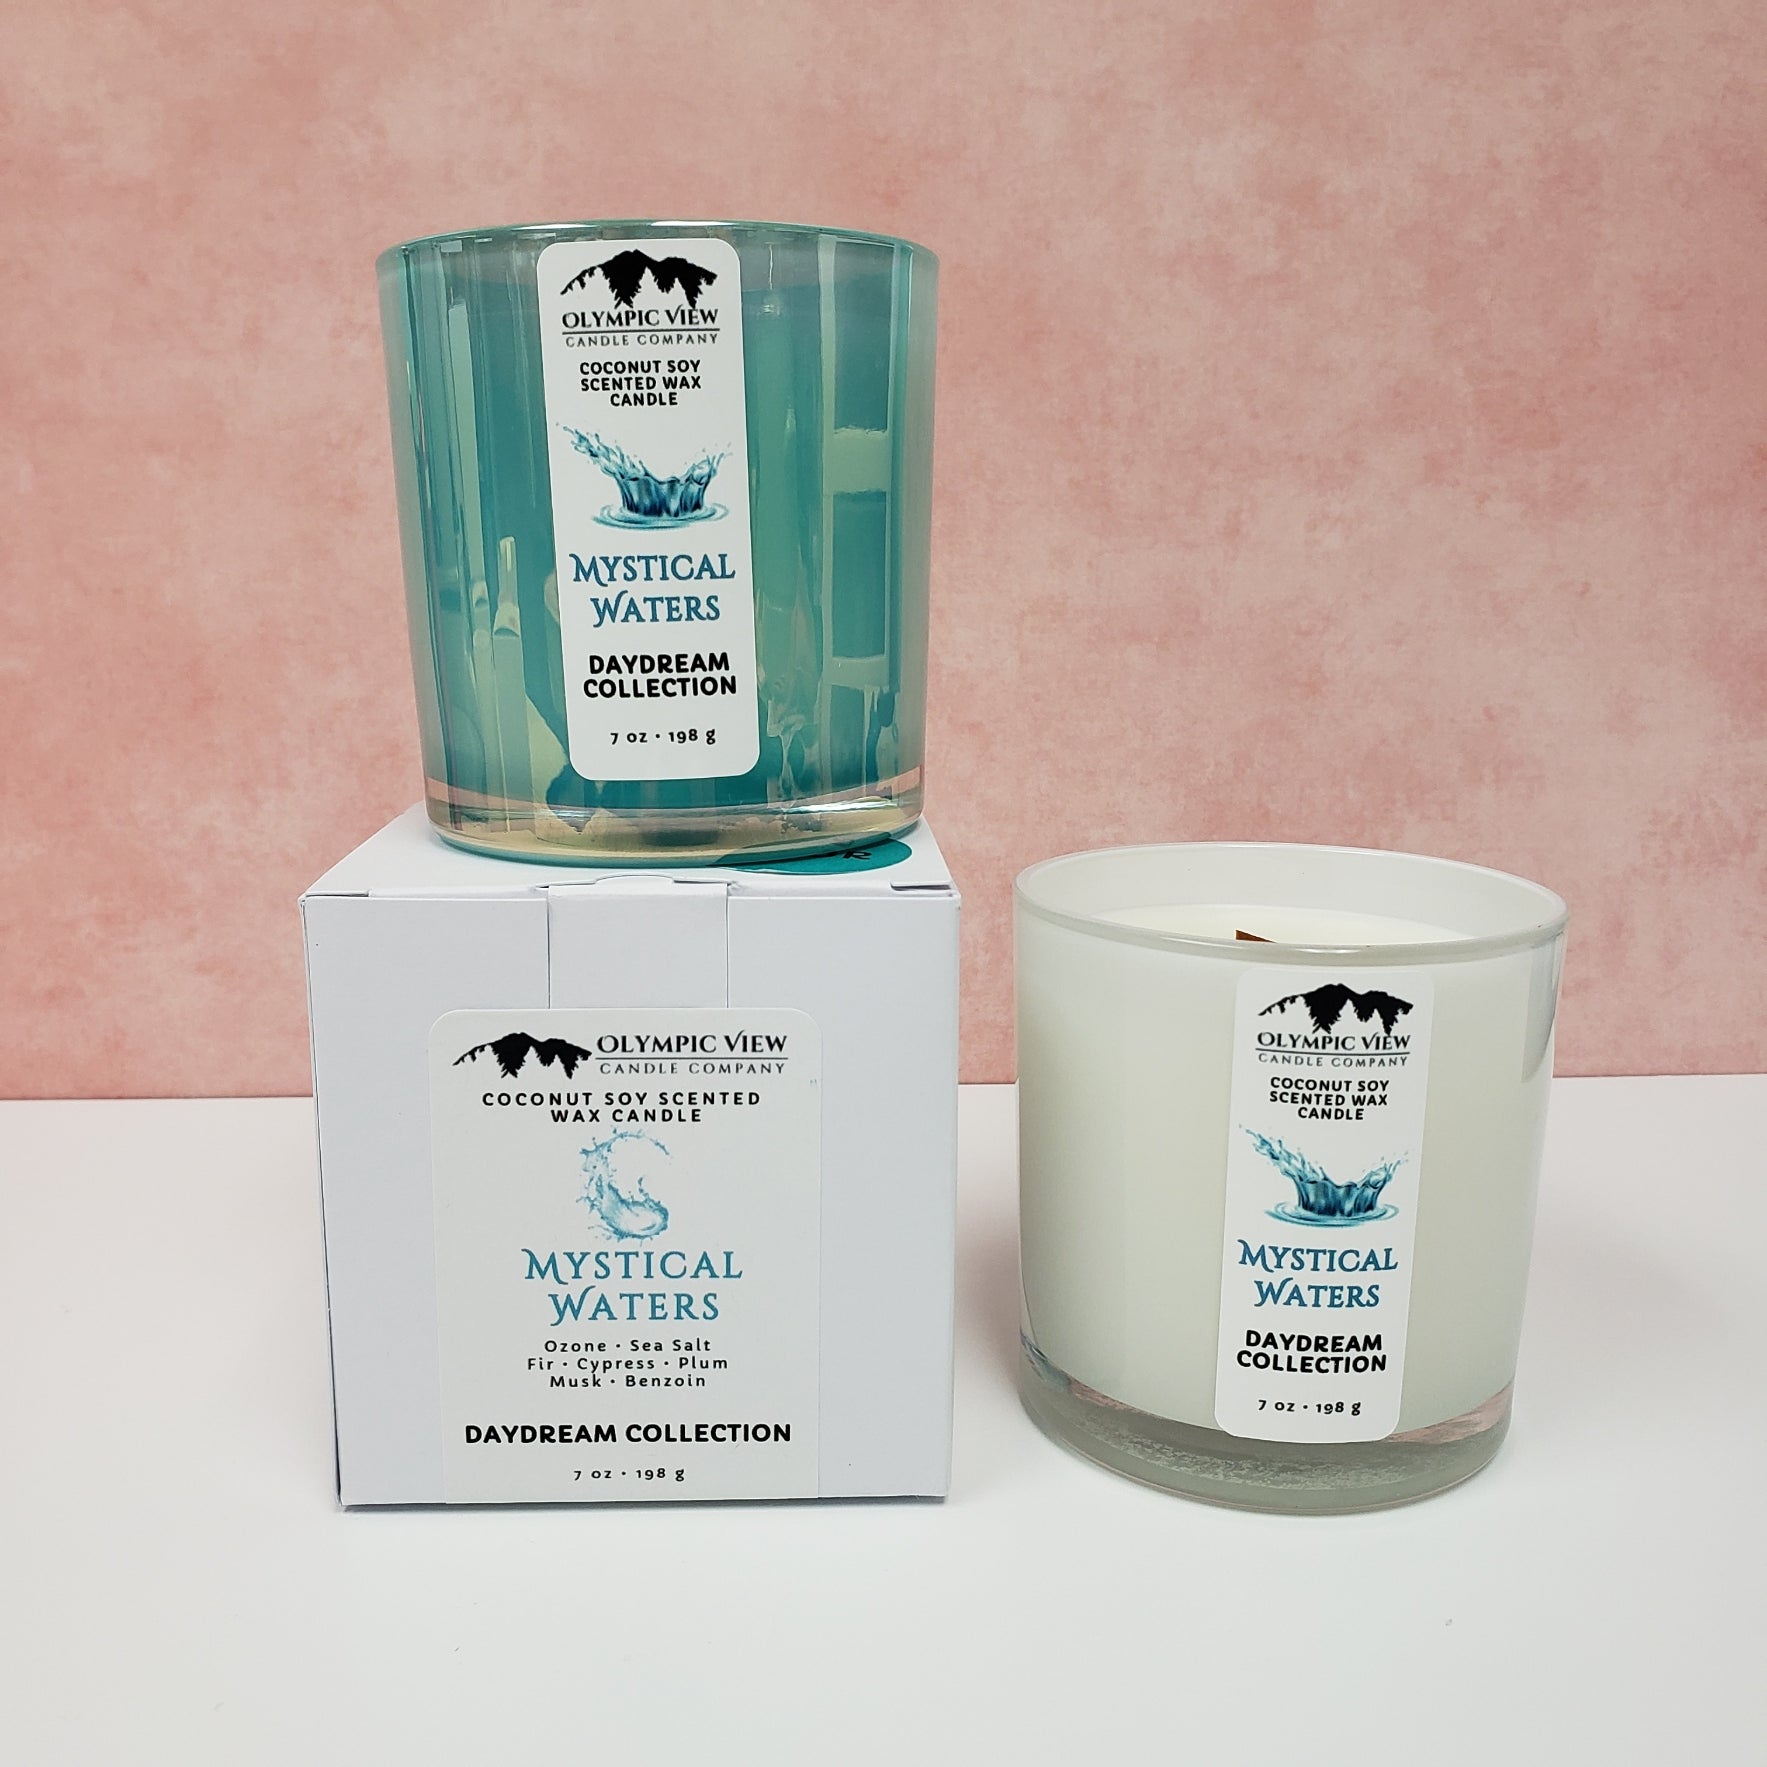 Mystical Waters wooden wicked candles in a Mermaid Teal and Milk White jar. They come in a white matte box. Hand poured by Olympic View Candle.